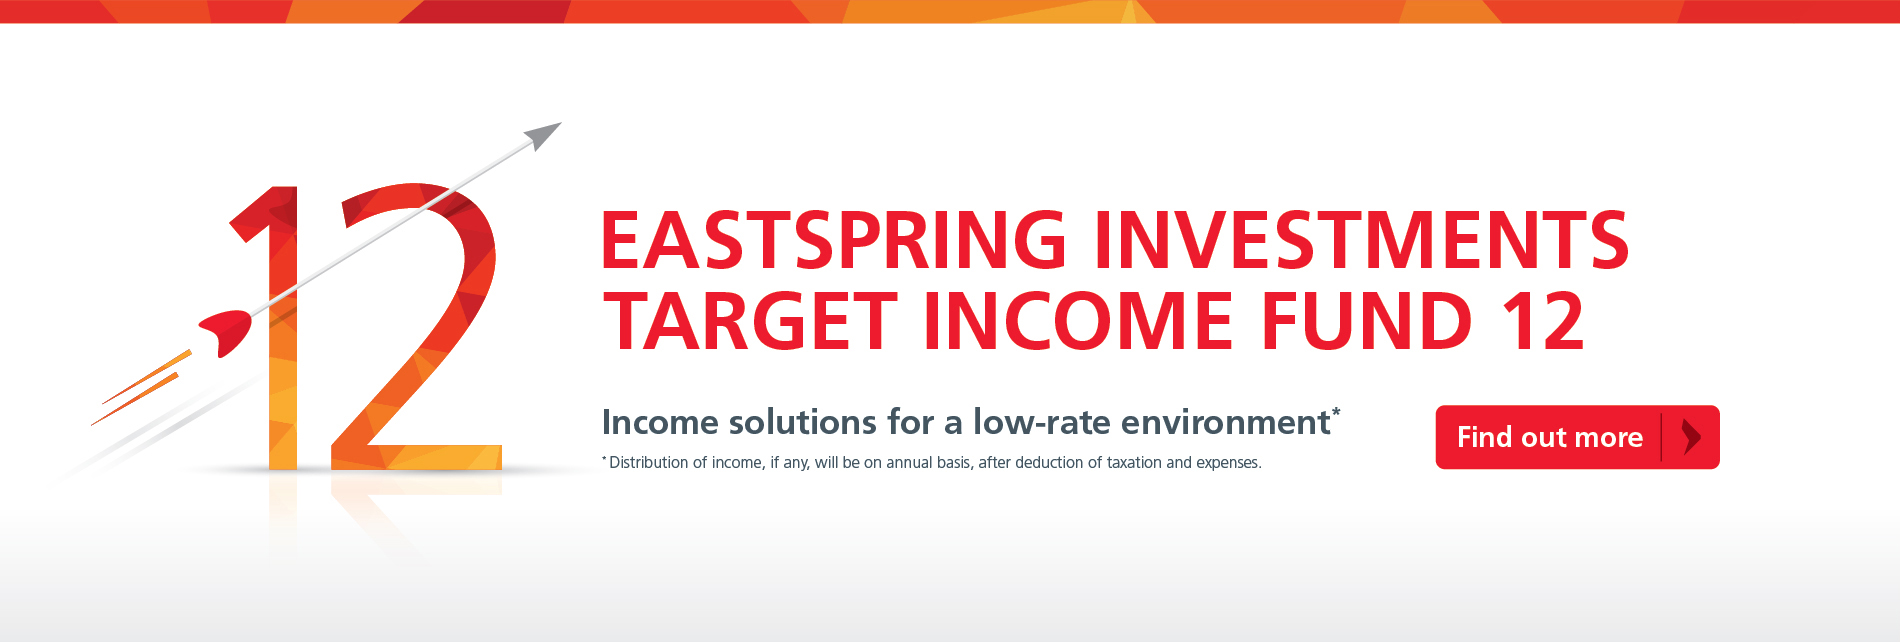 eastspring investments global target income fund